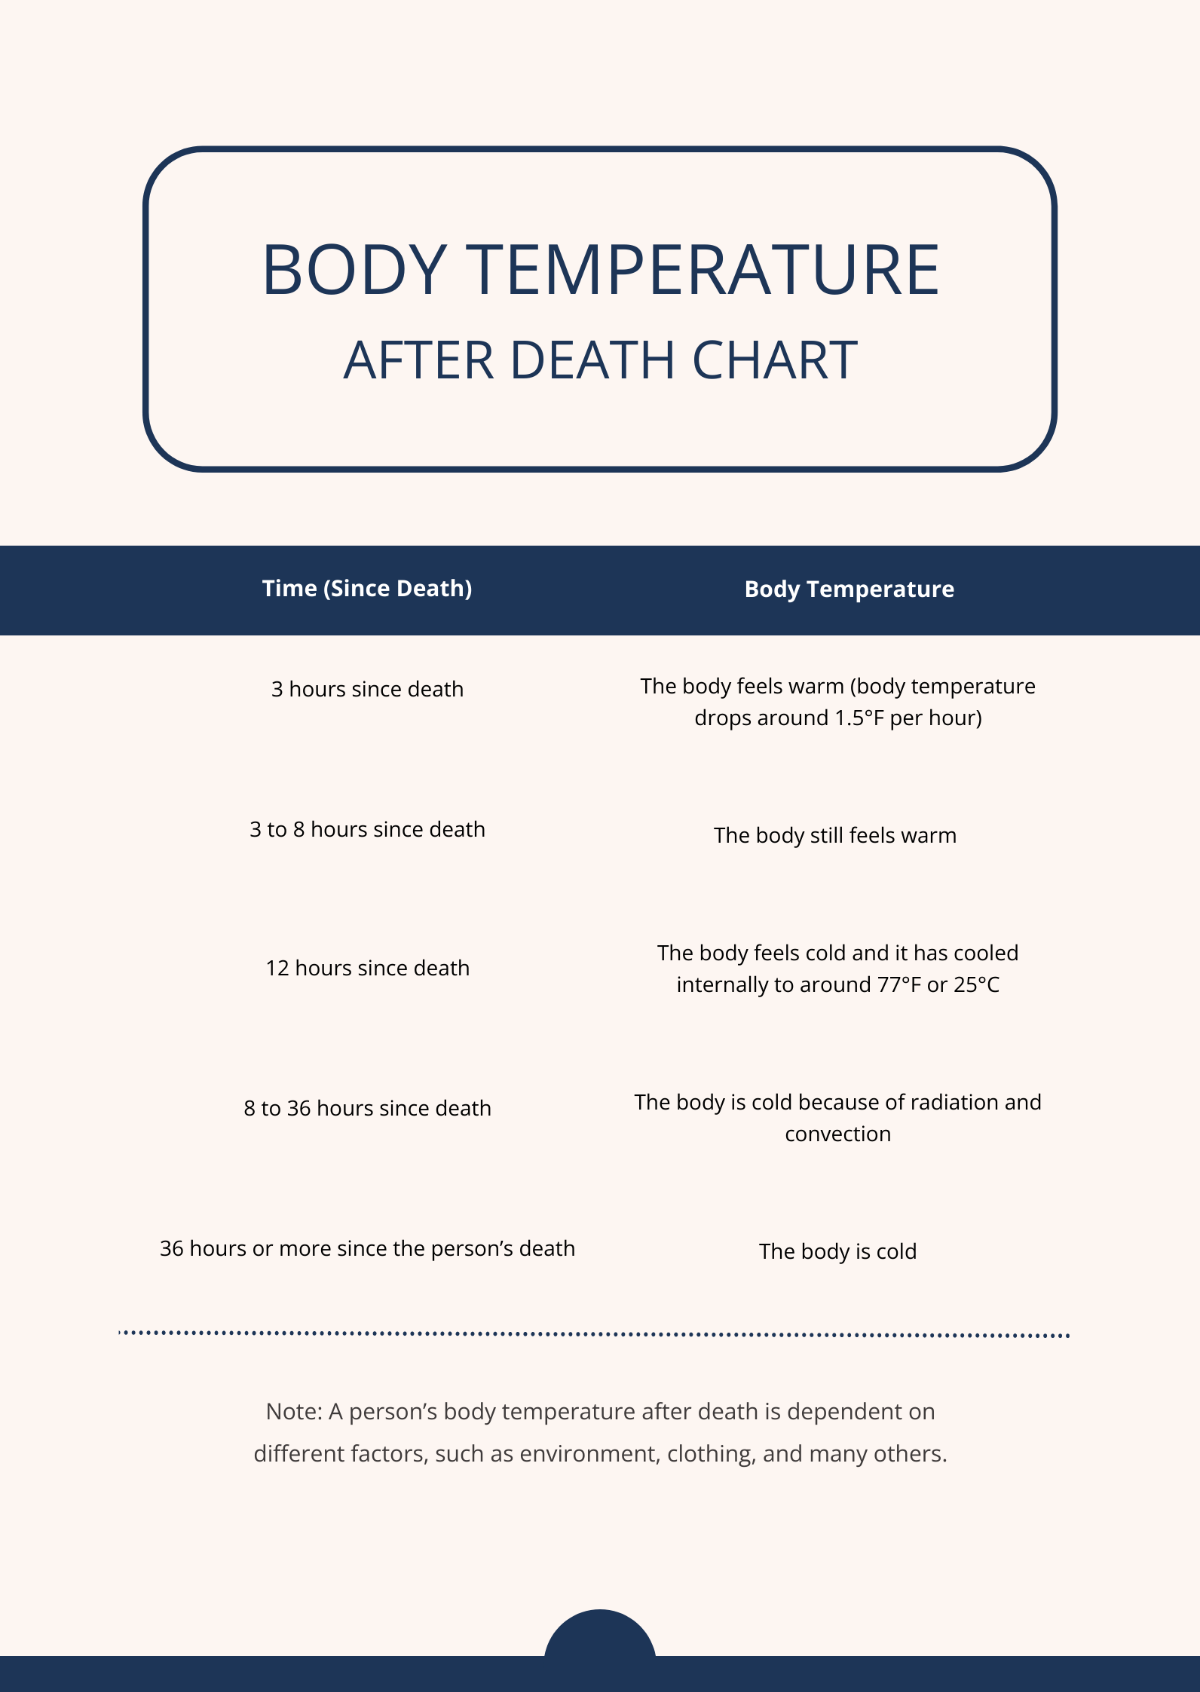 Body Temperature After Death Chart Template